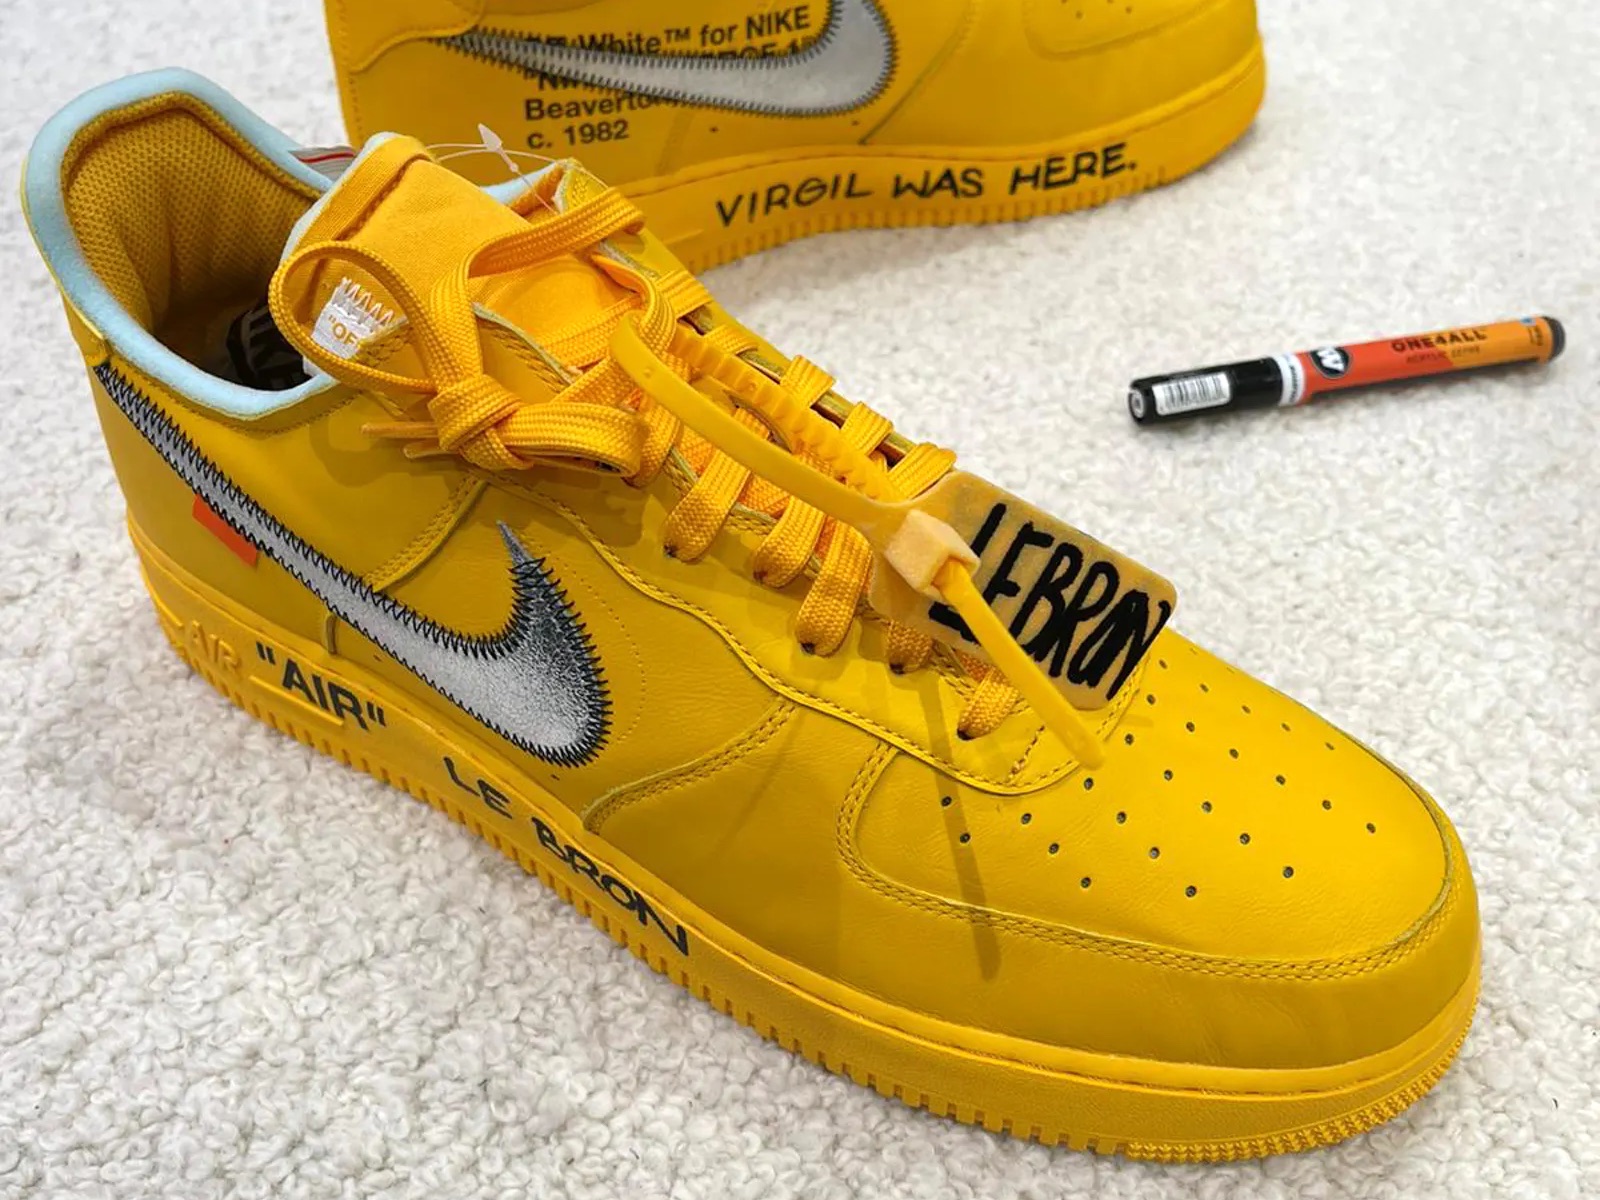 J23 iPhone App on X: Off-White x Nike Air Force 1 “Brooklyn” SNKRS PASS  ->   / X